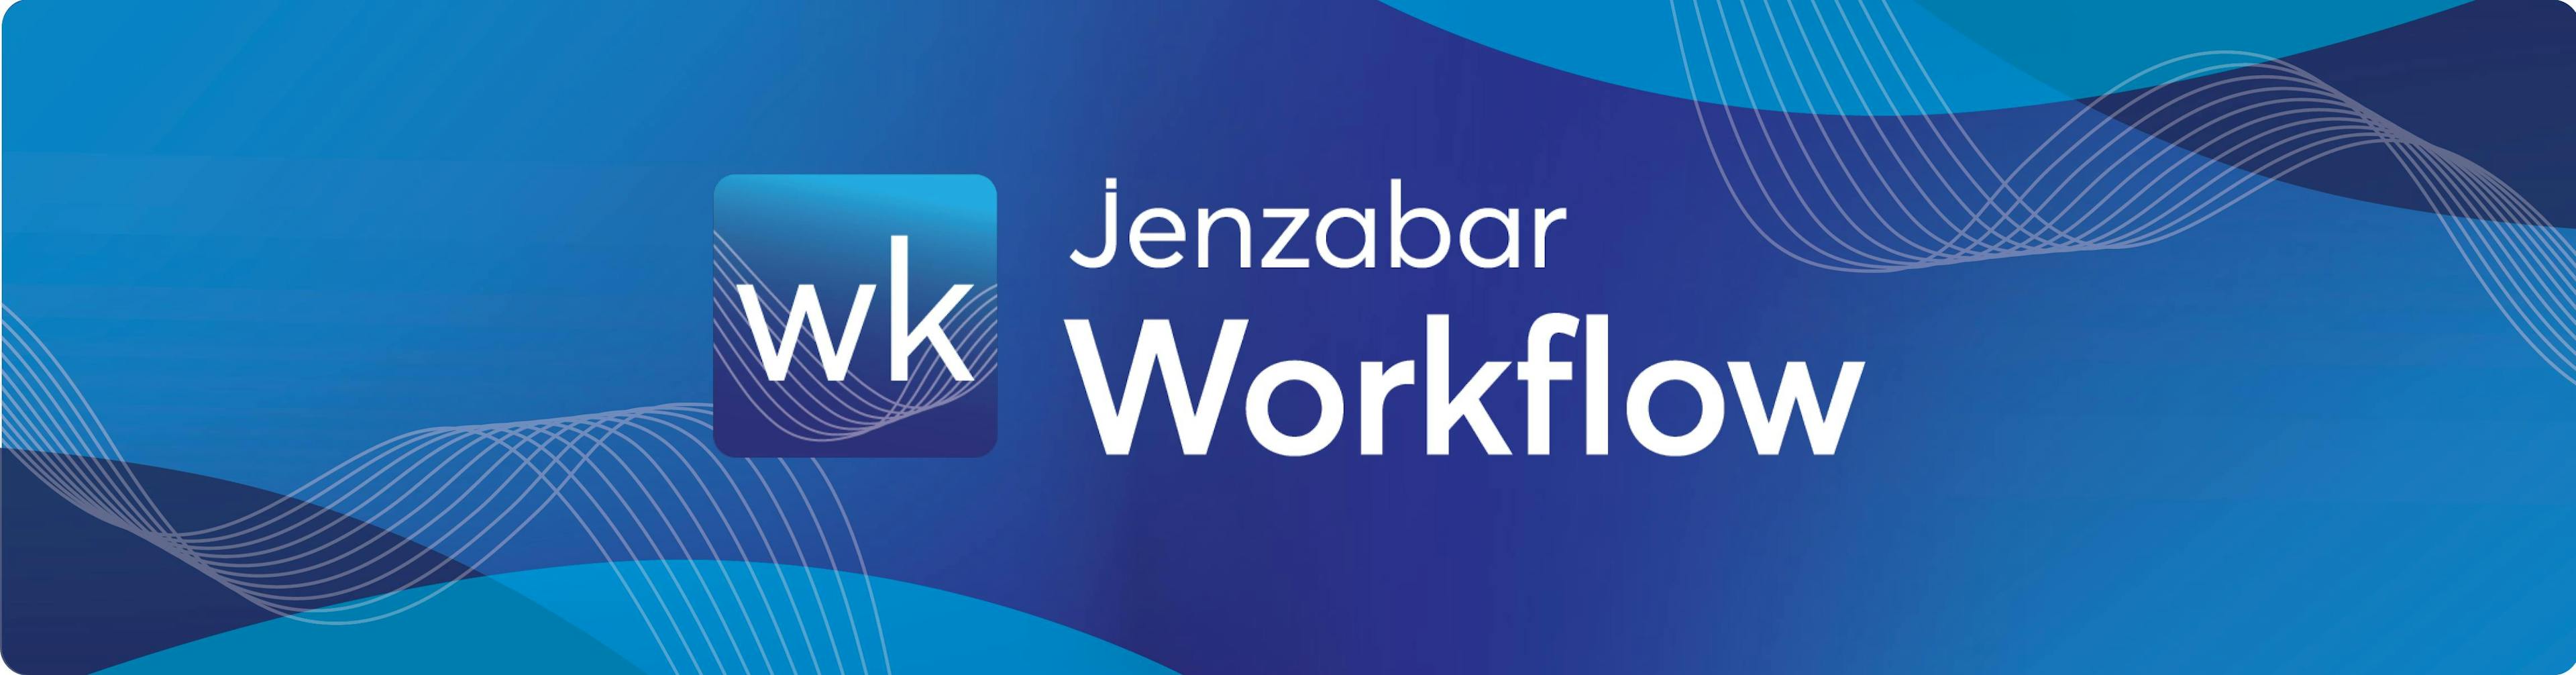 Jenzabar Workflow - Workflow automation software for higher education